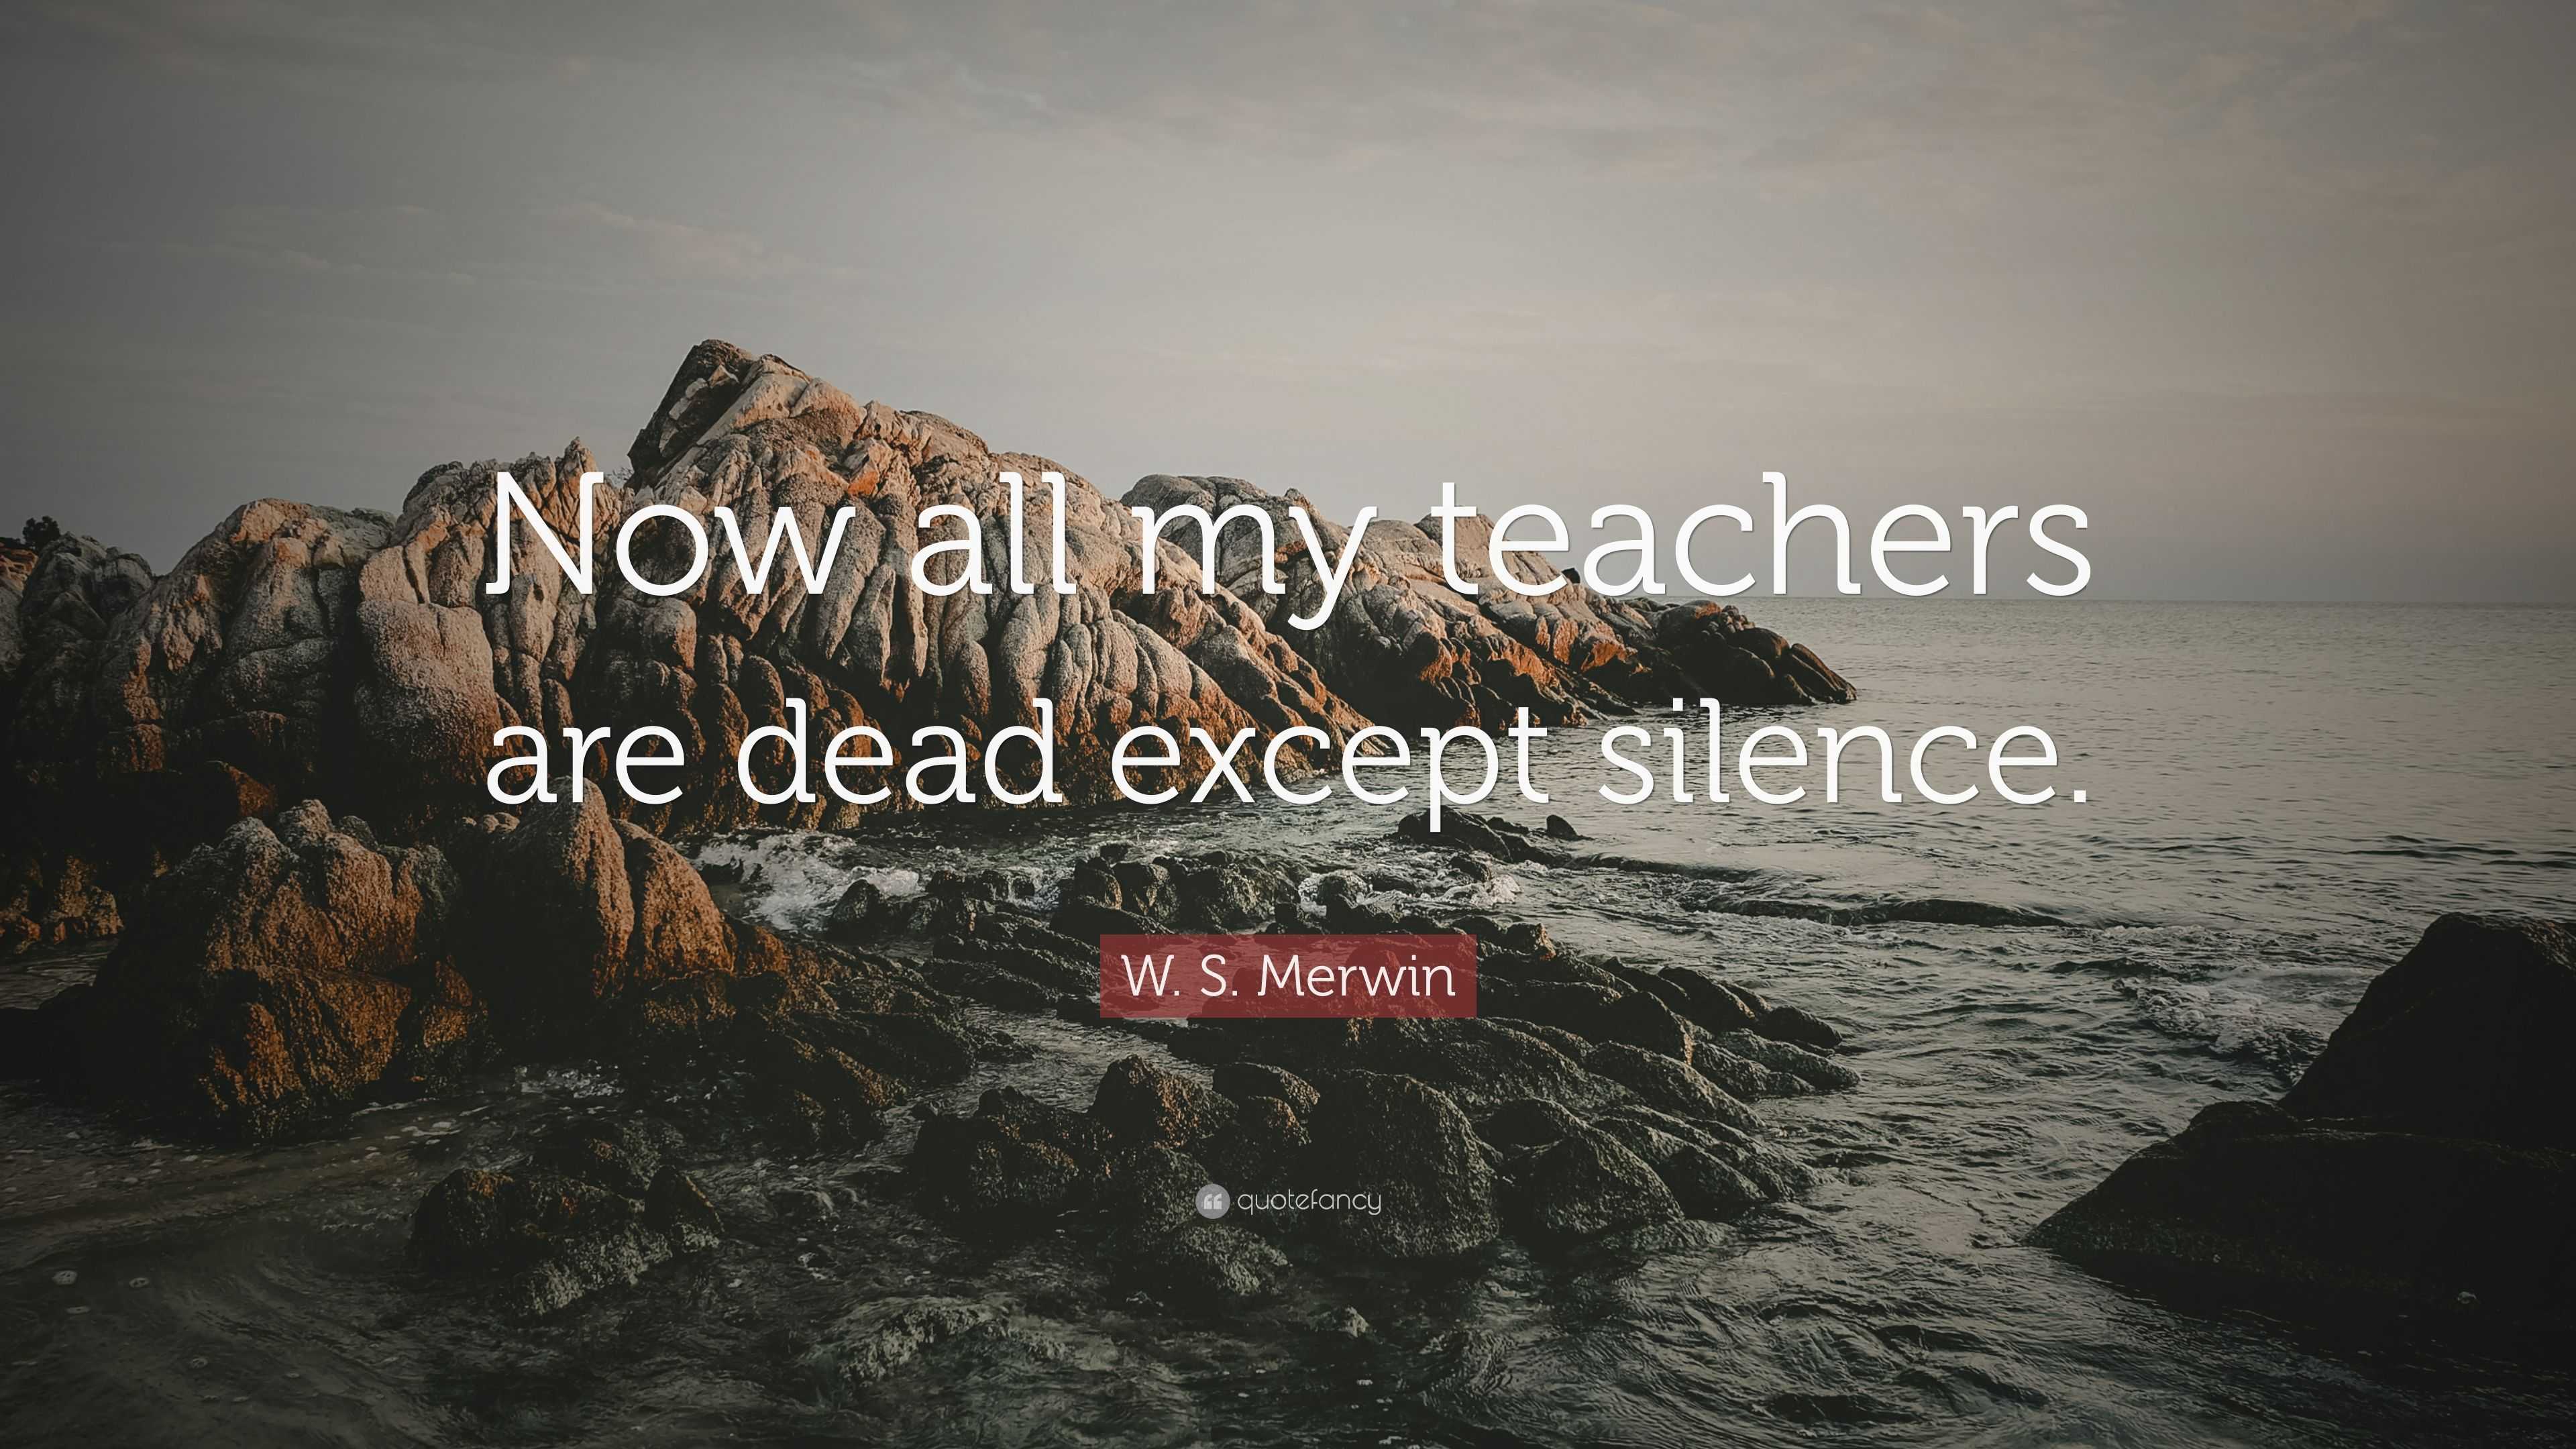 W. S. Merwin Quote: “Now all my teachers are dead except silence.”